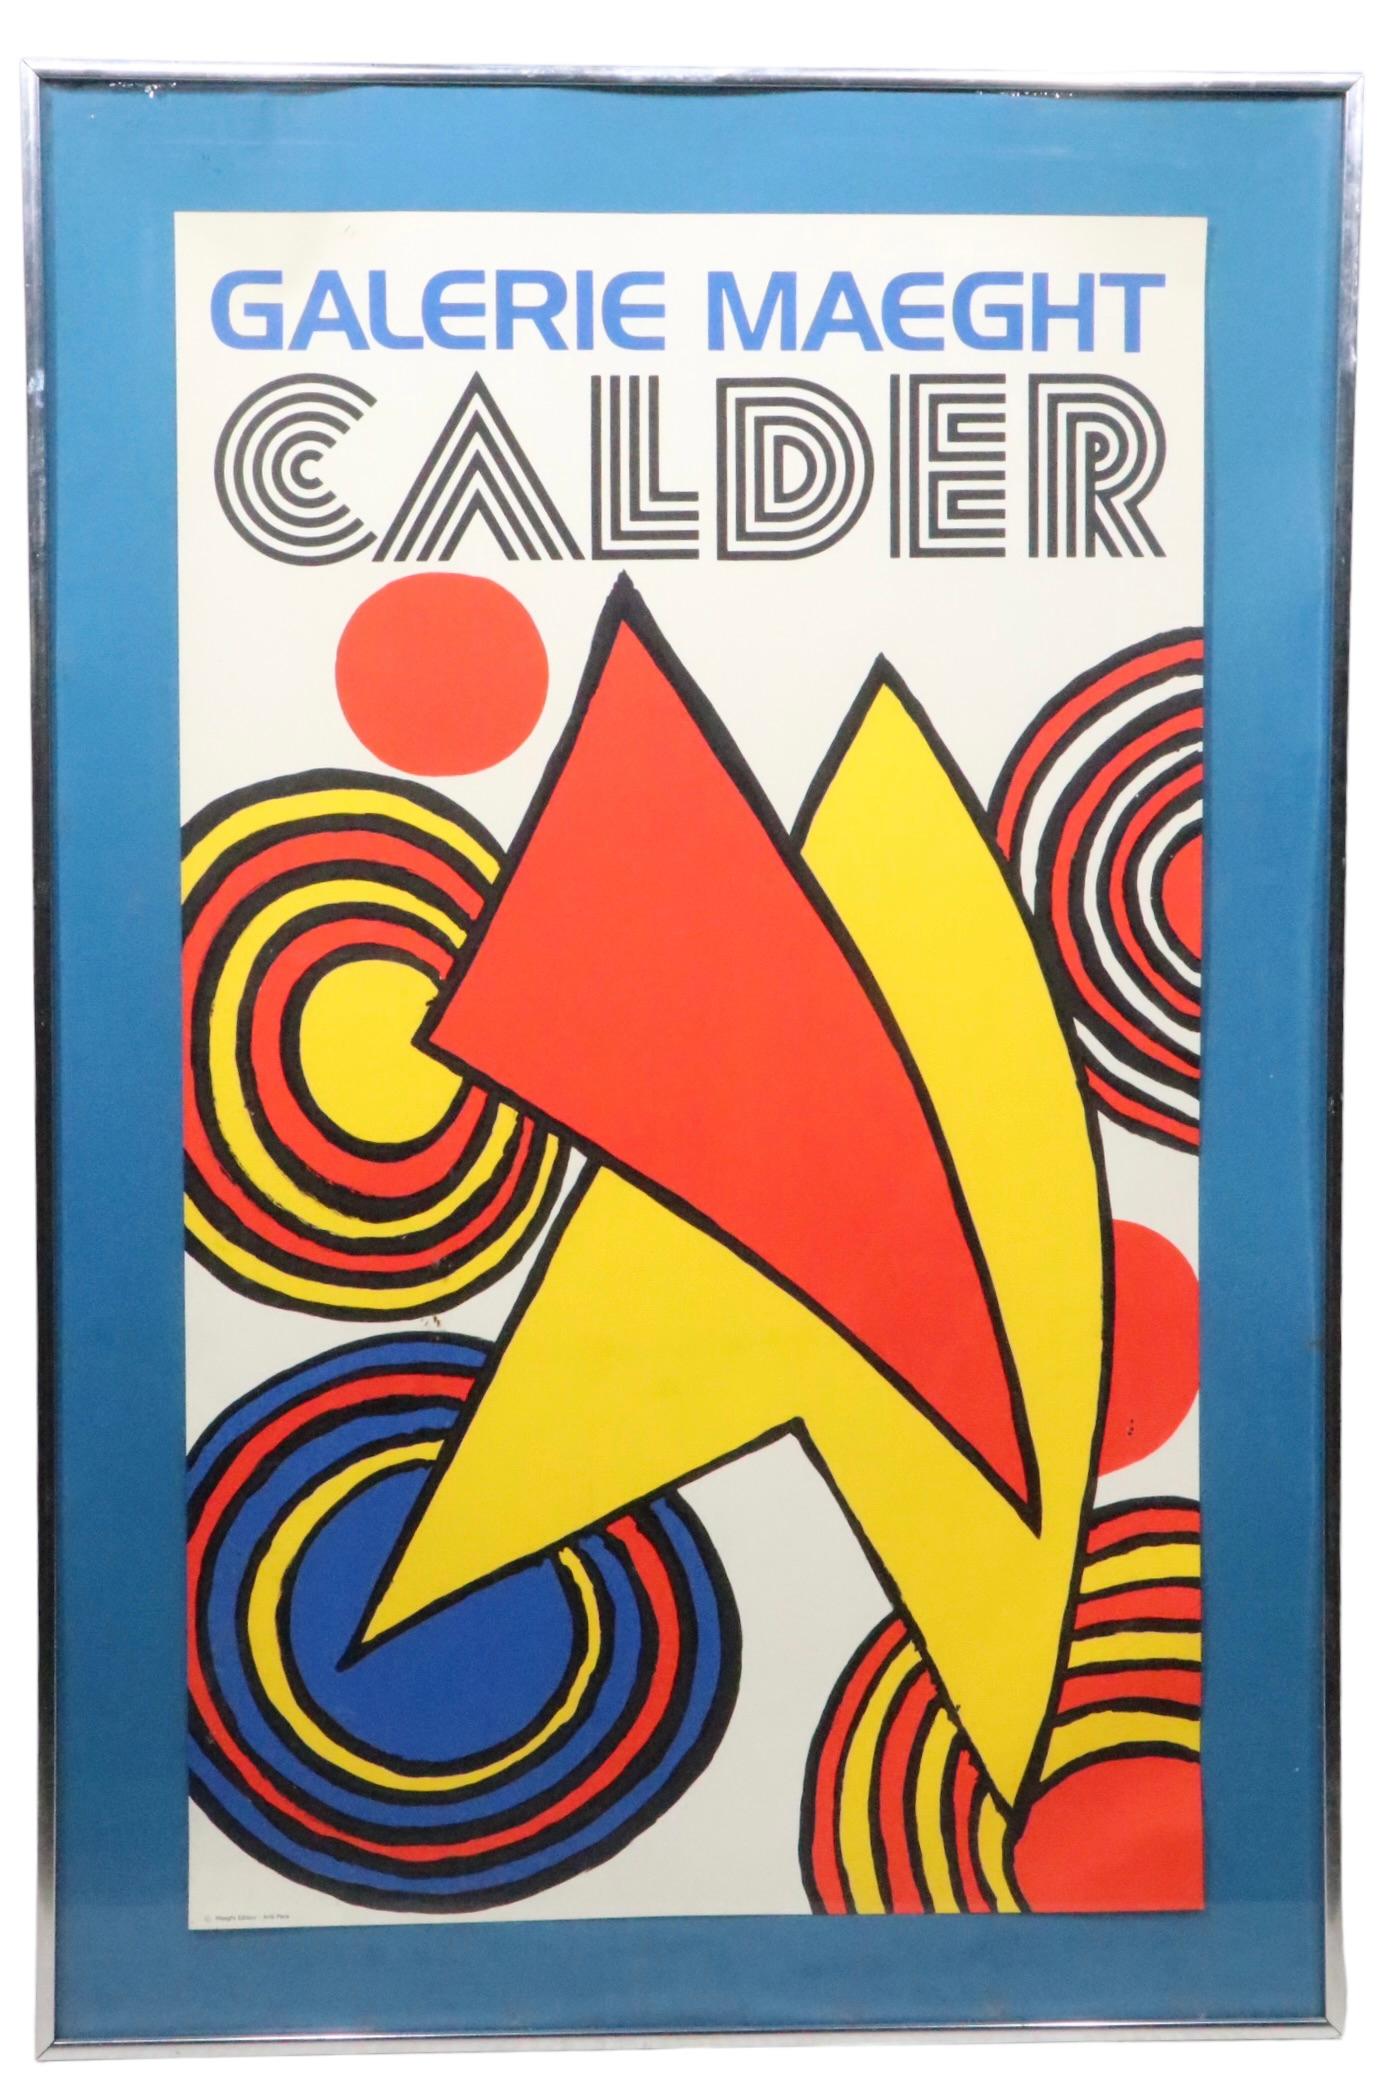  Framed Calder Galerie Maeght Lithograph  Poster Maeght Editeur - Arte Paris 70s In Good Condition For Sale In New York, NY